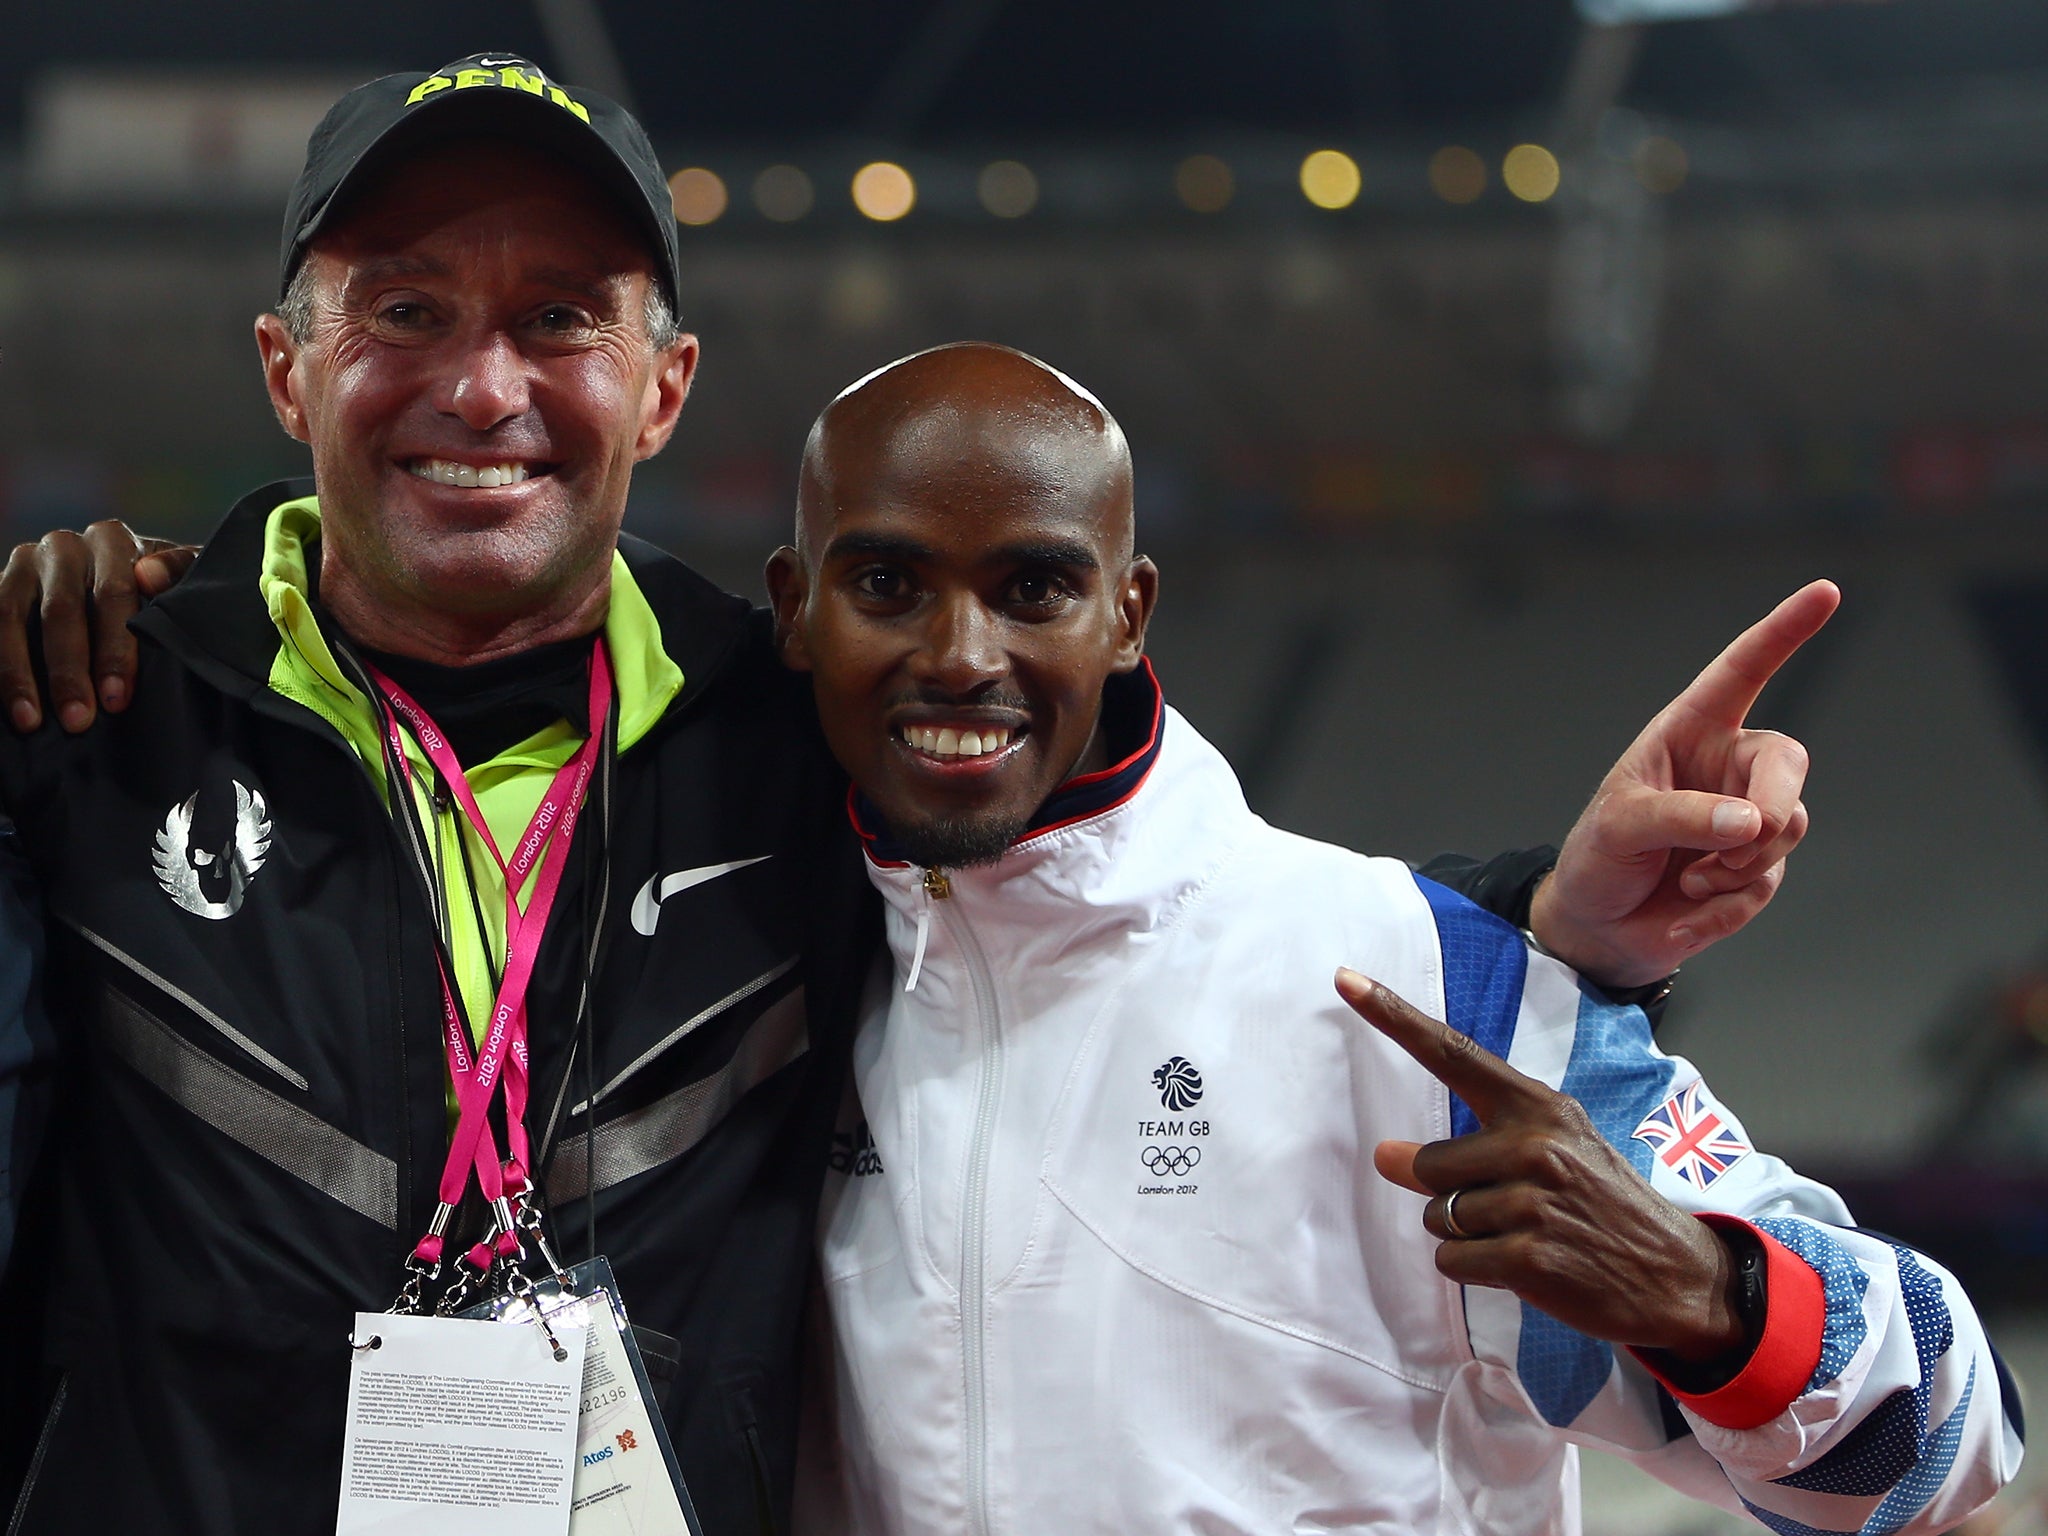 Alberto Salazar worked with British athlete Sir Mo Farah between 2011 and 2017